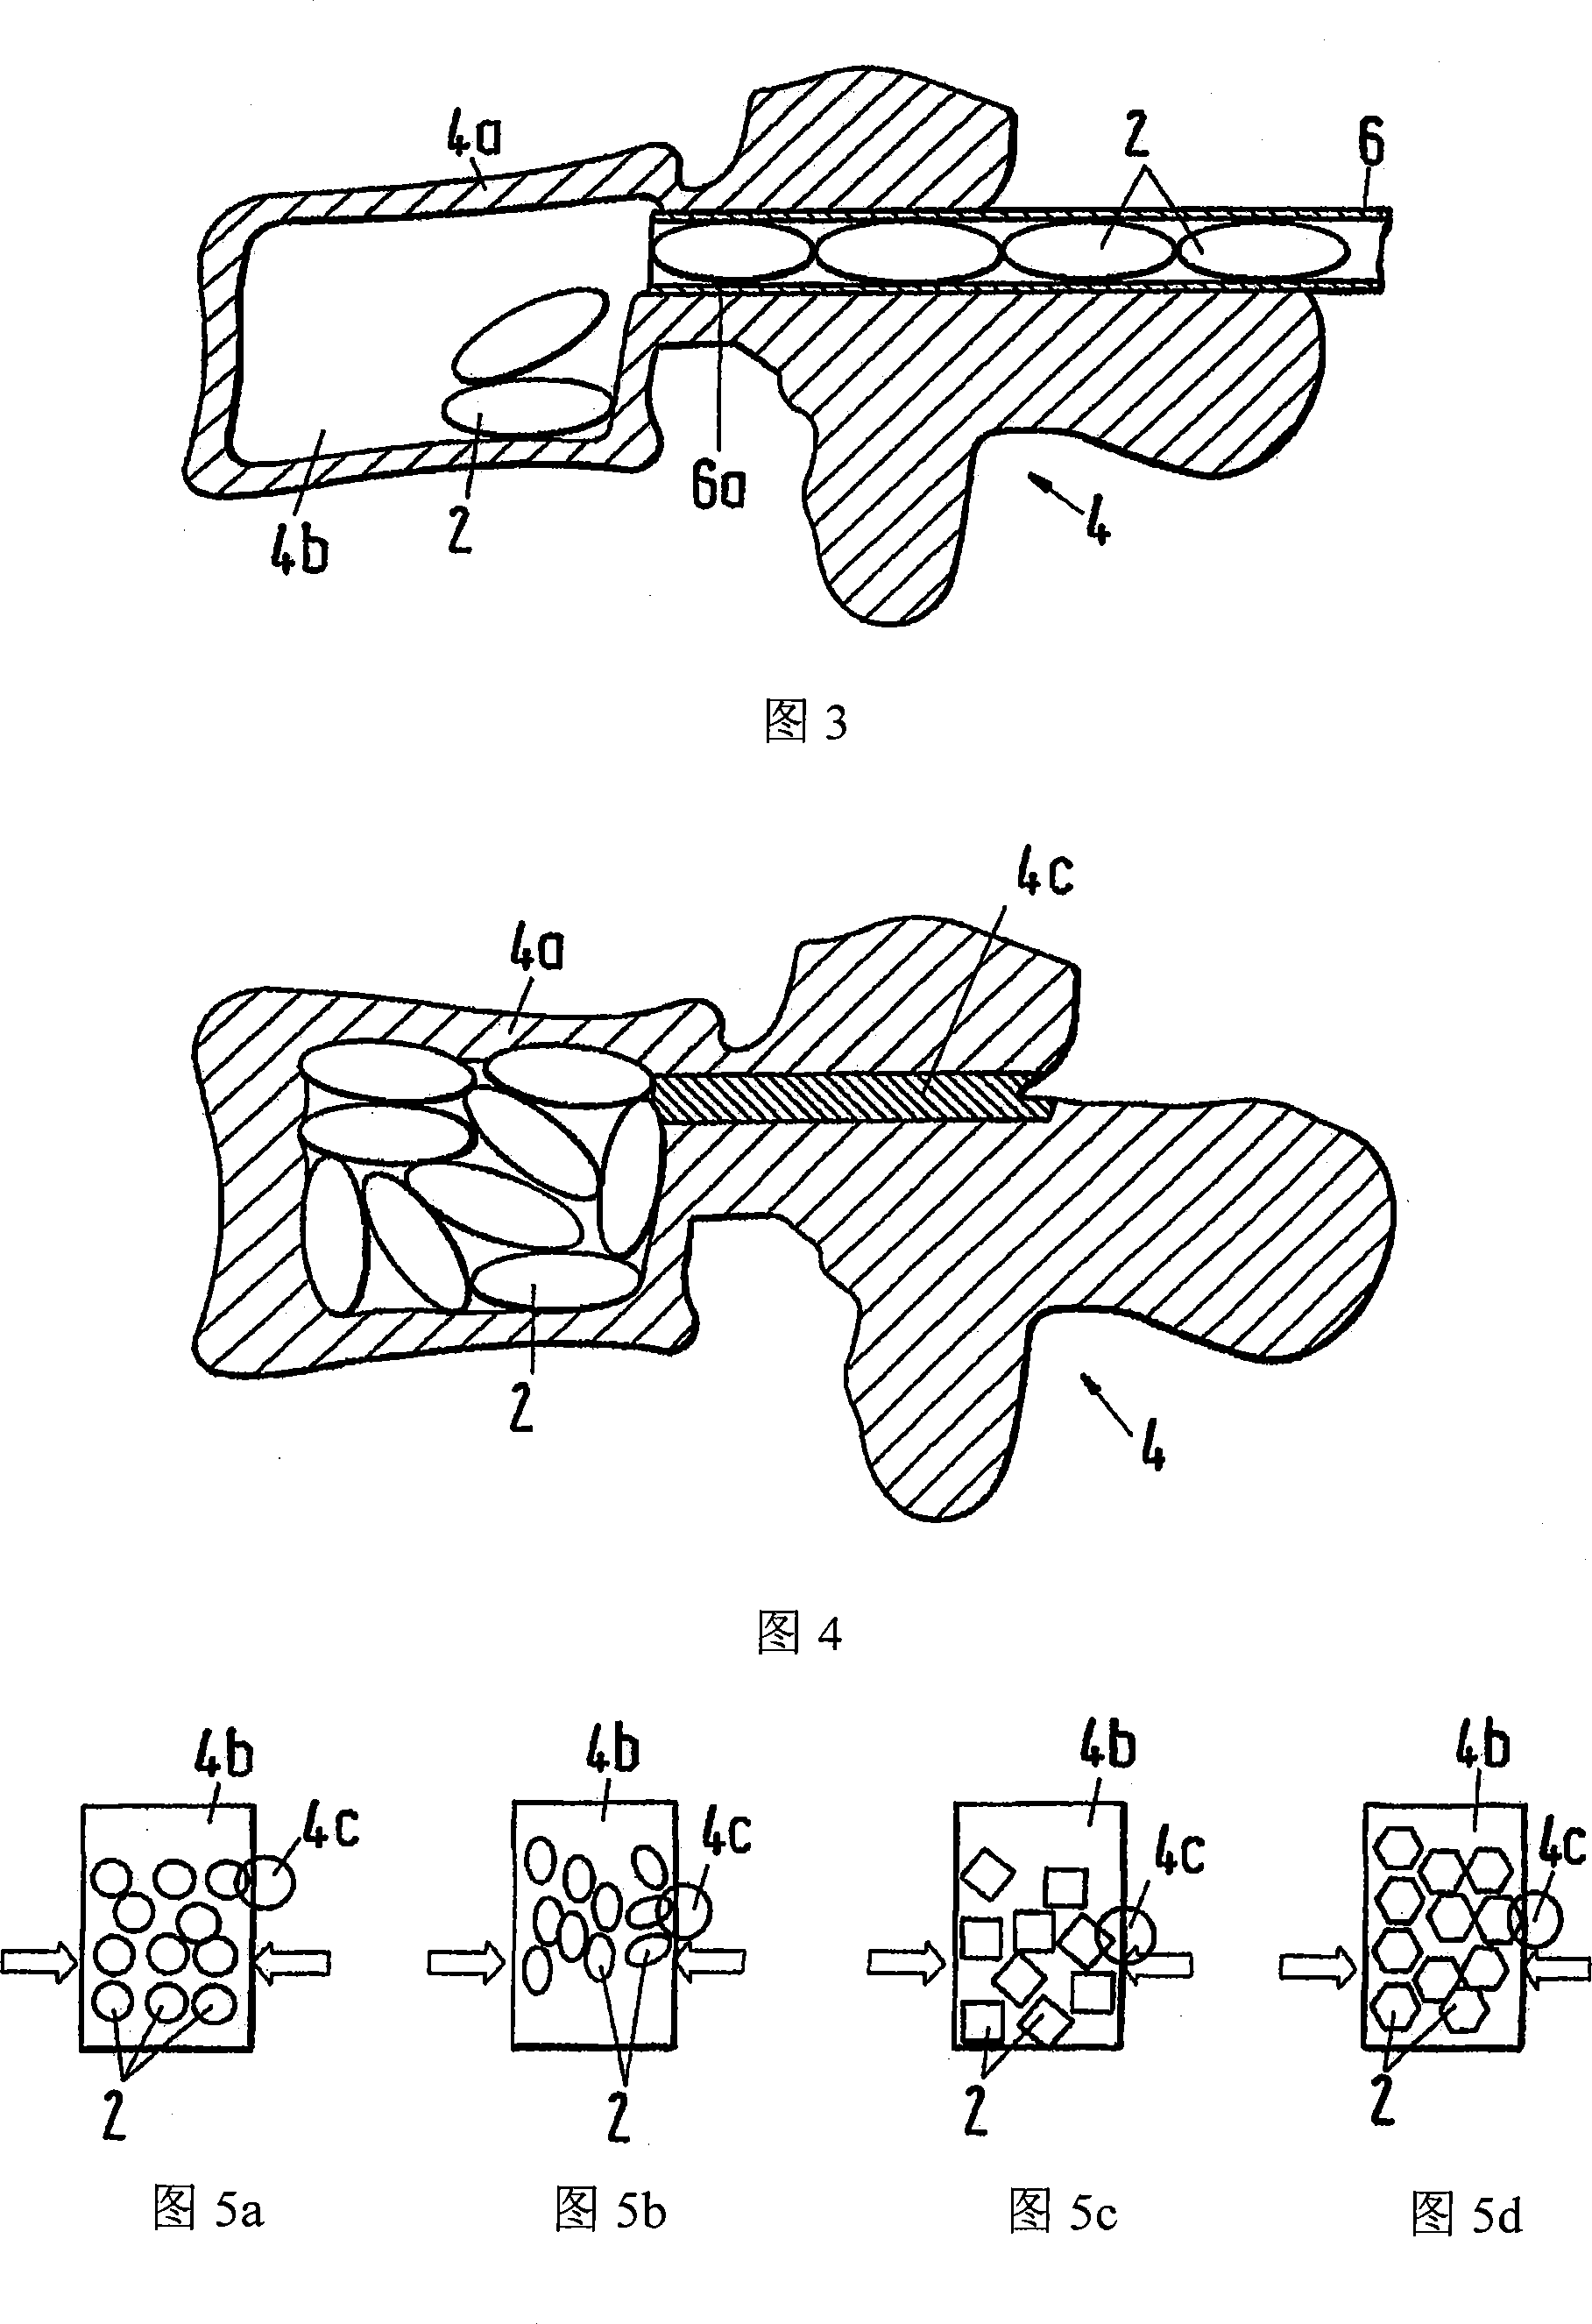 Filler and administration method and device for forming a supportive structure in a bone cavity